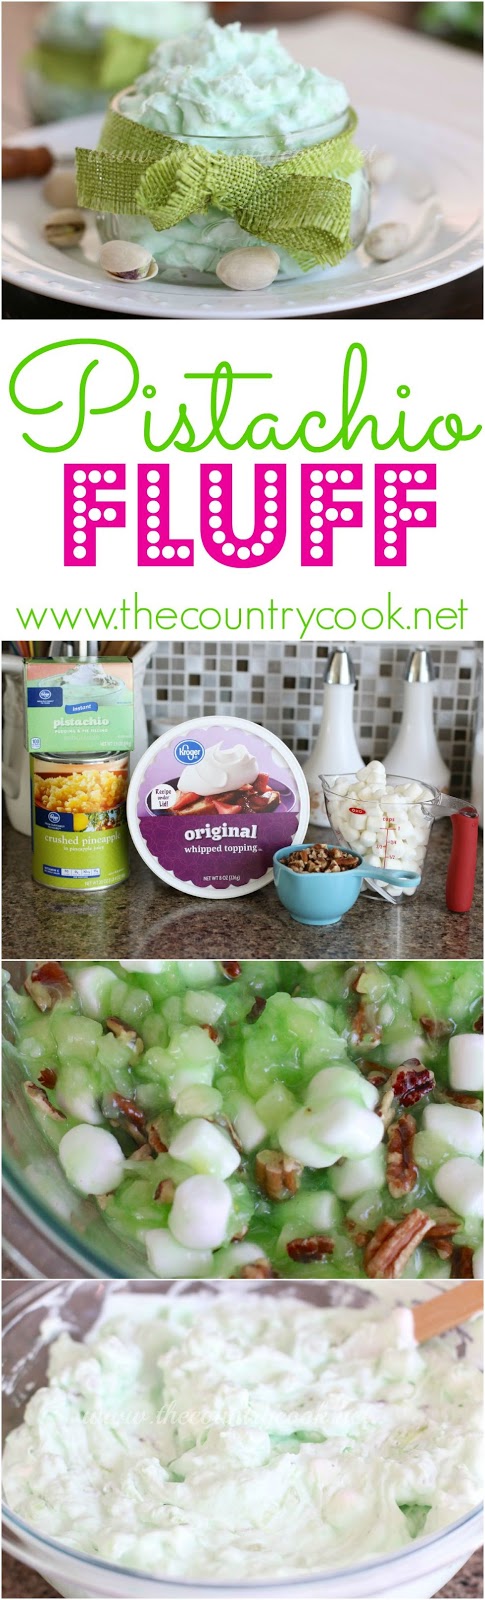 The Country Cook: Pistachio Fluff